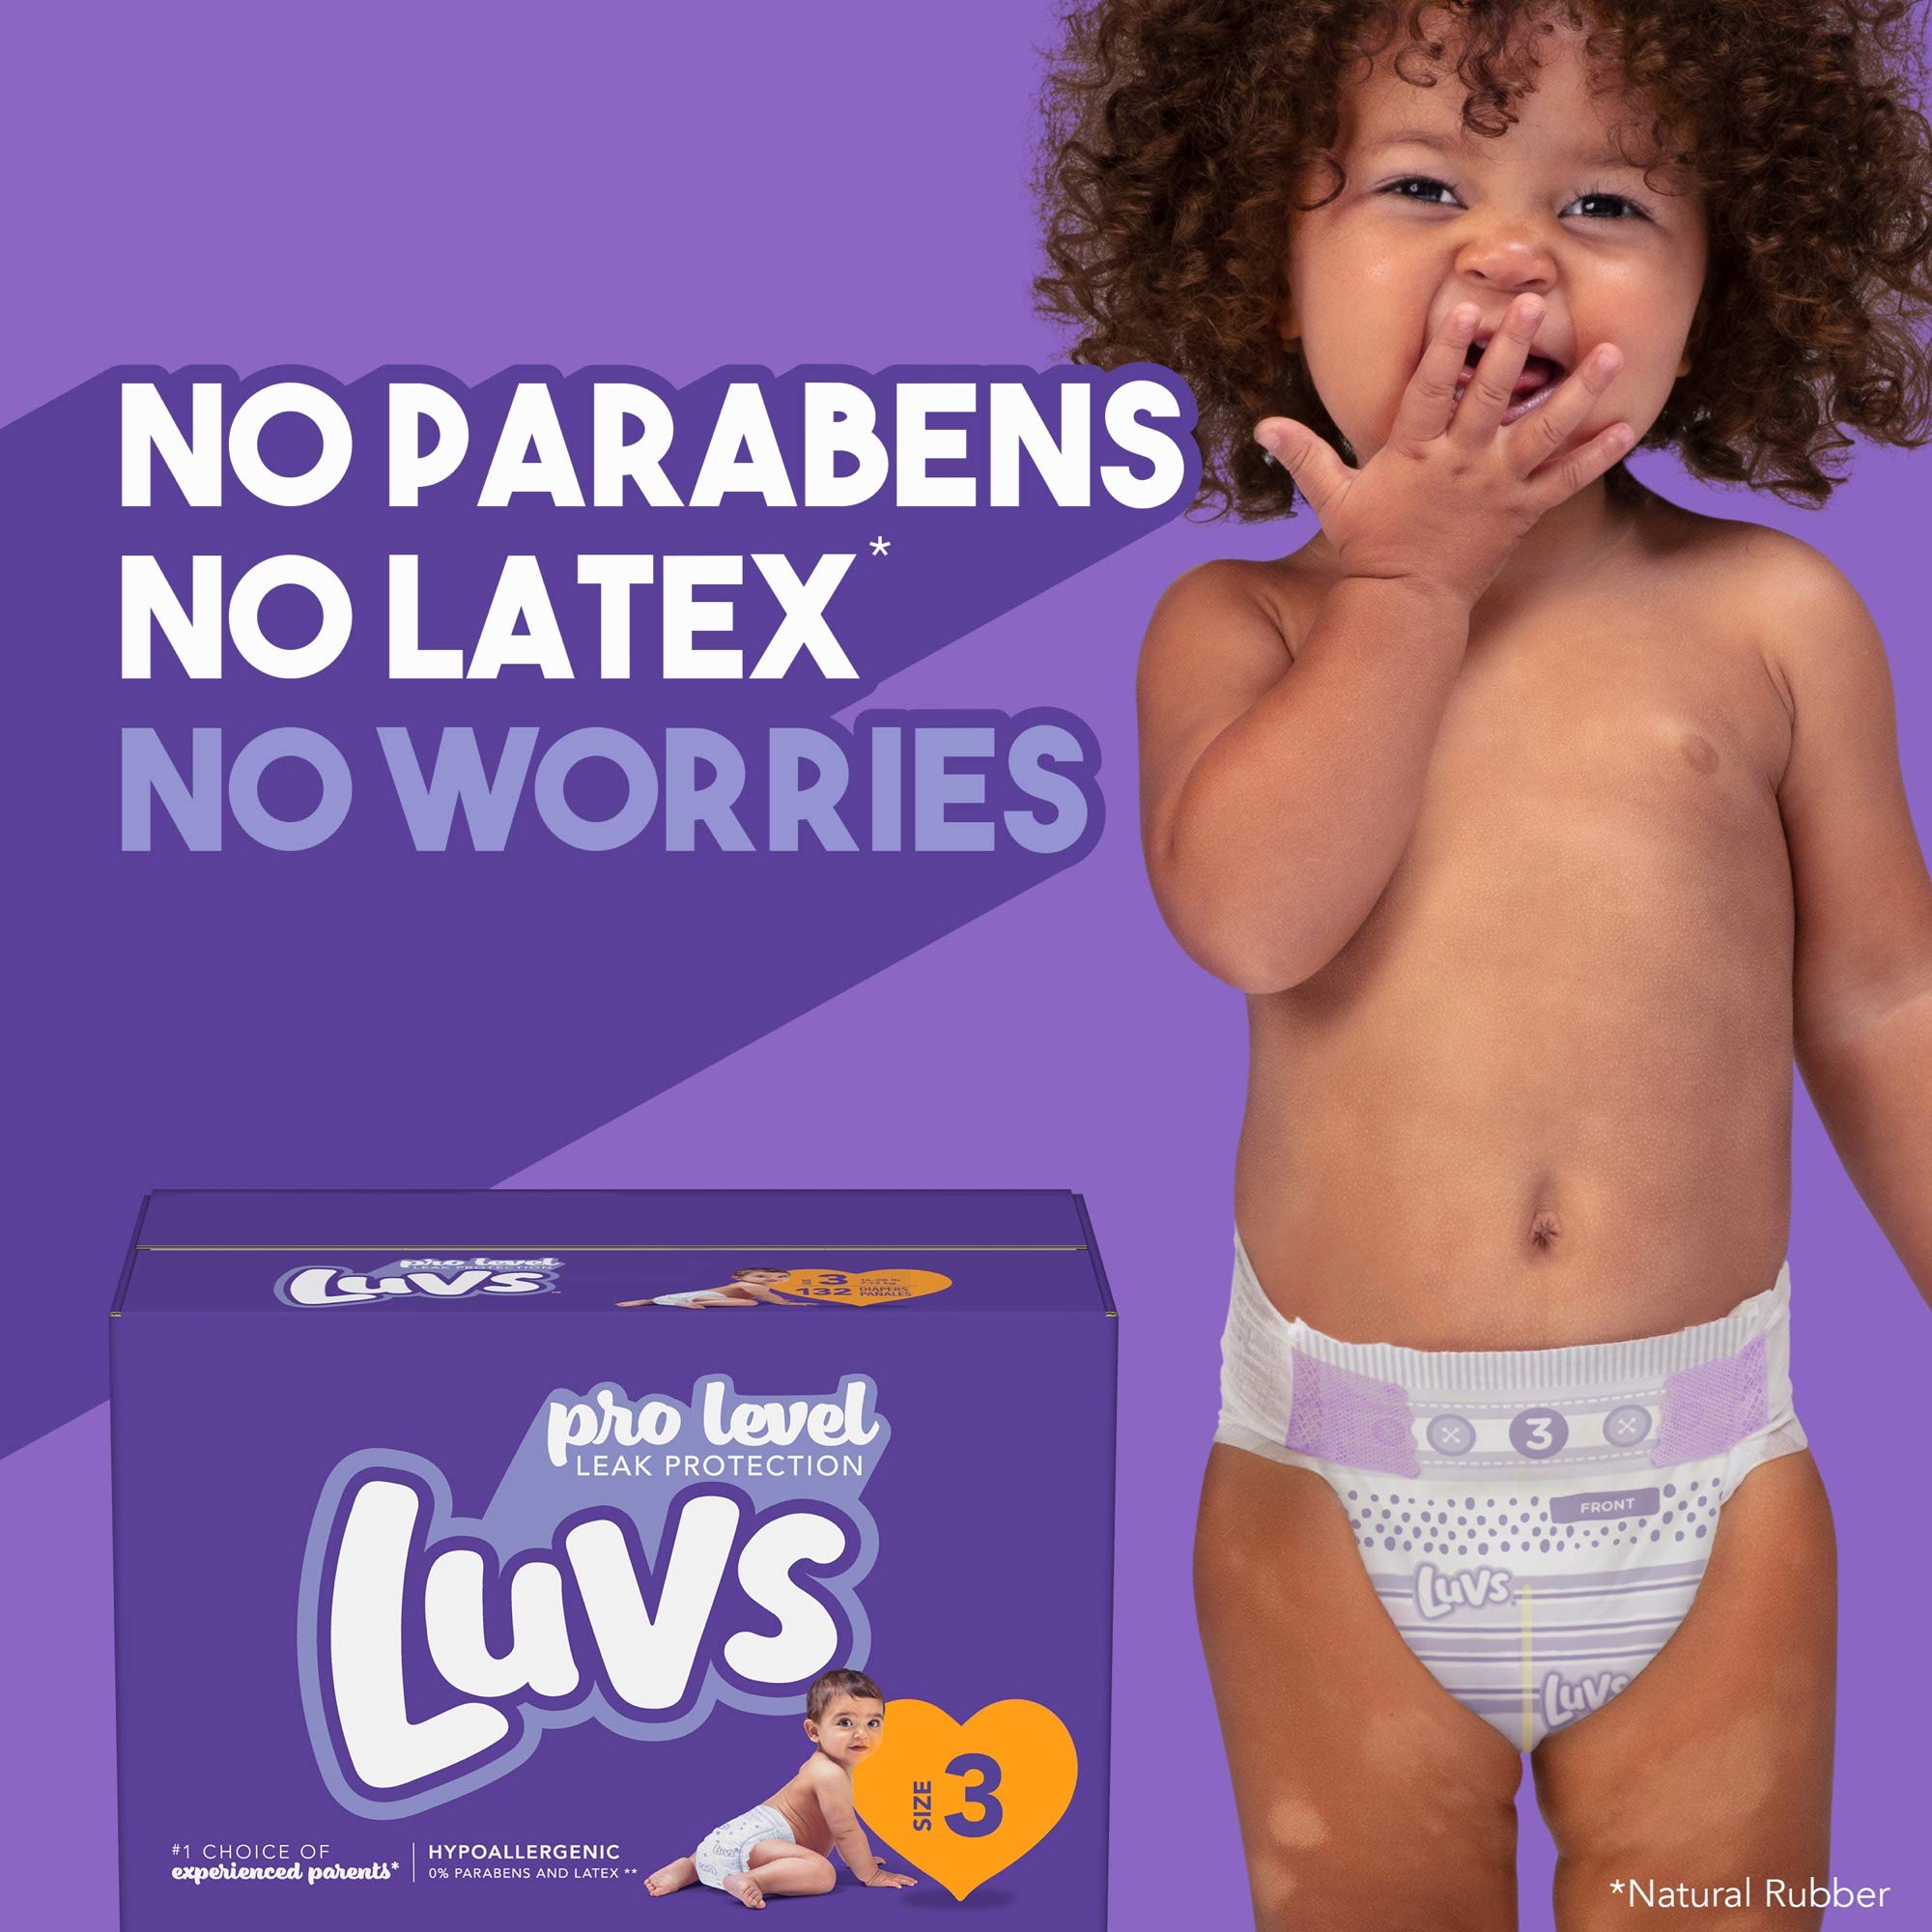 Diapers Newborn/Size 1 (8-14 lb), 252 Count - Luvs Ultra Leakguards Disposable Baby Diapers, ONE MONTH SUPPLY